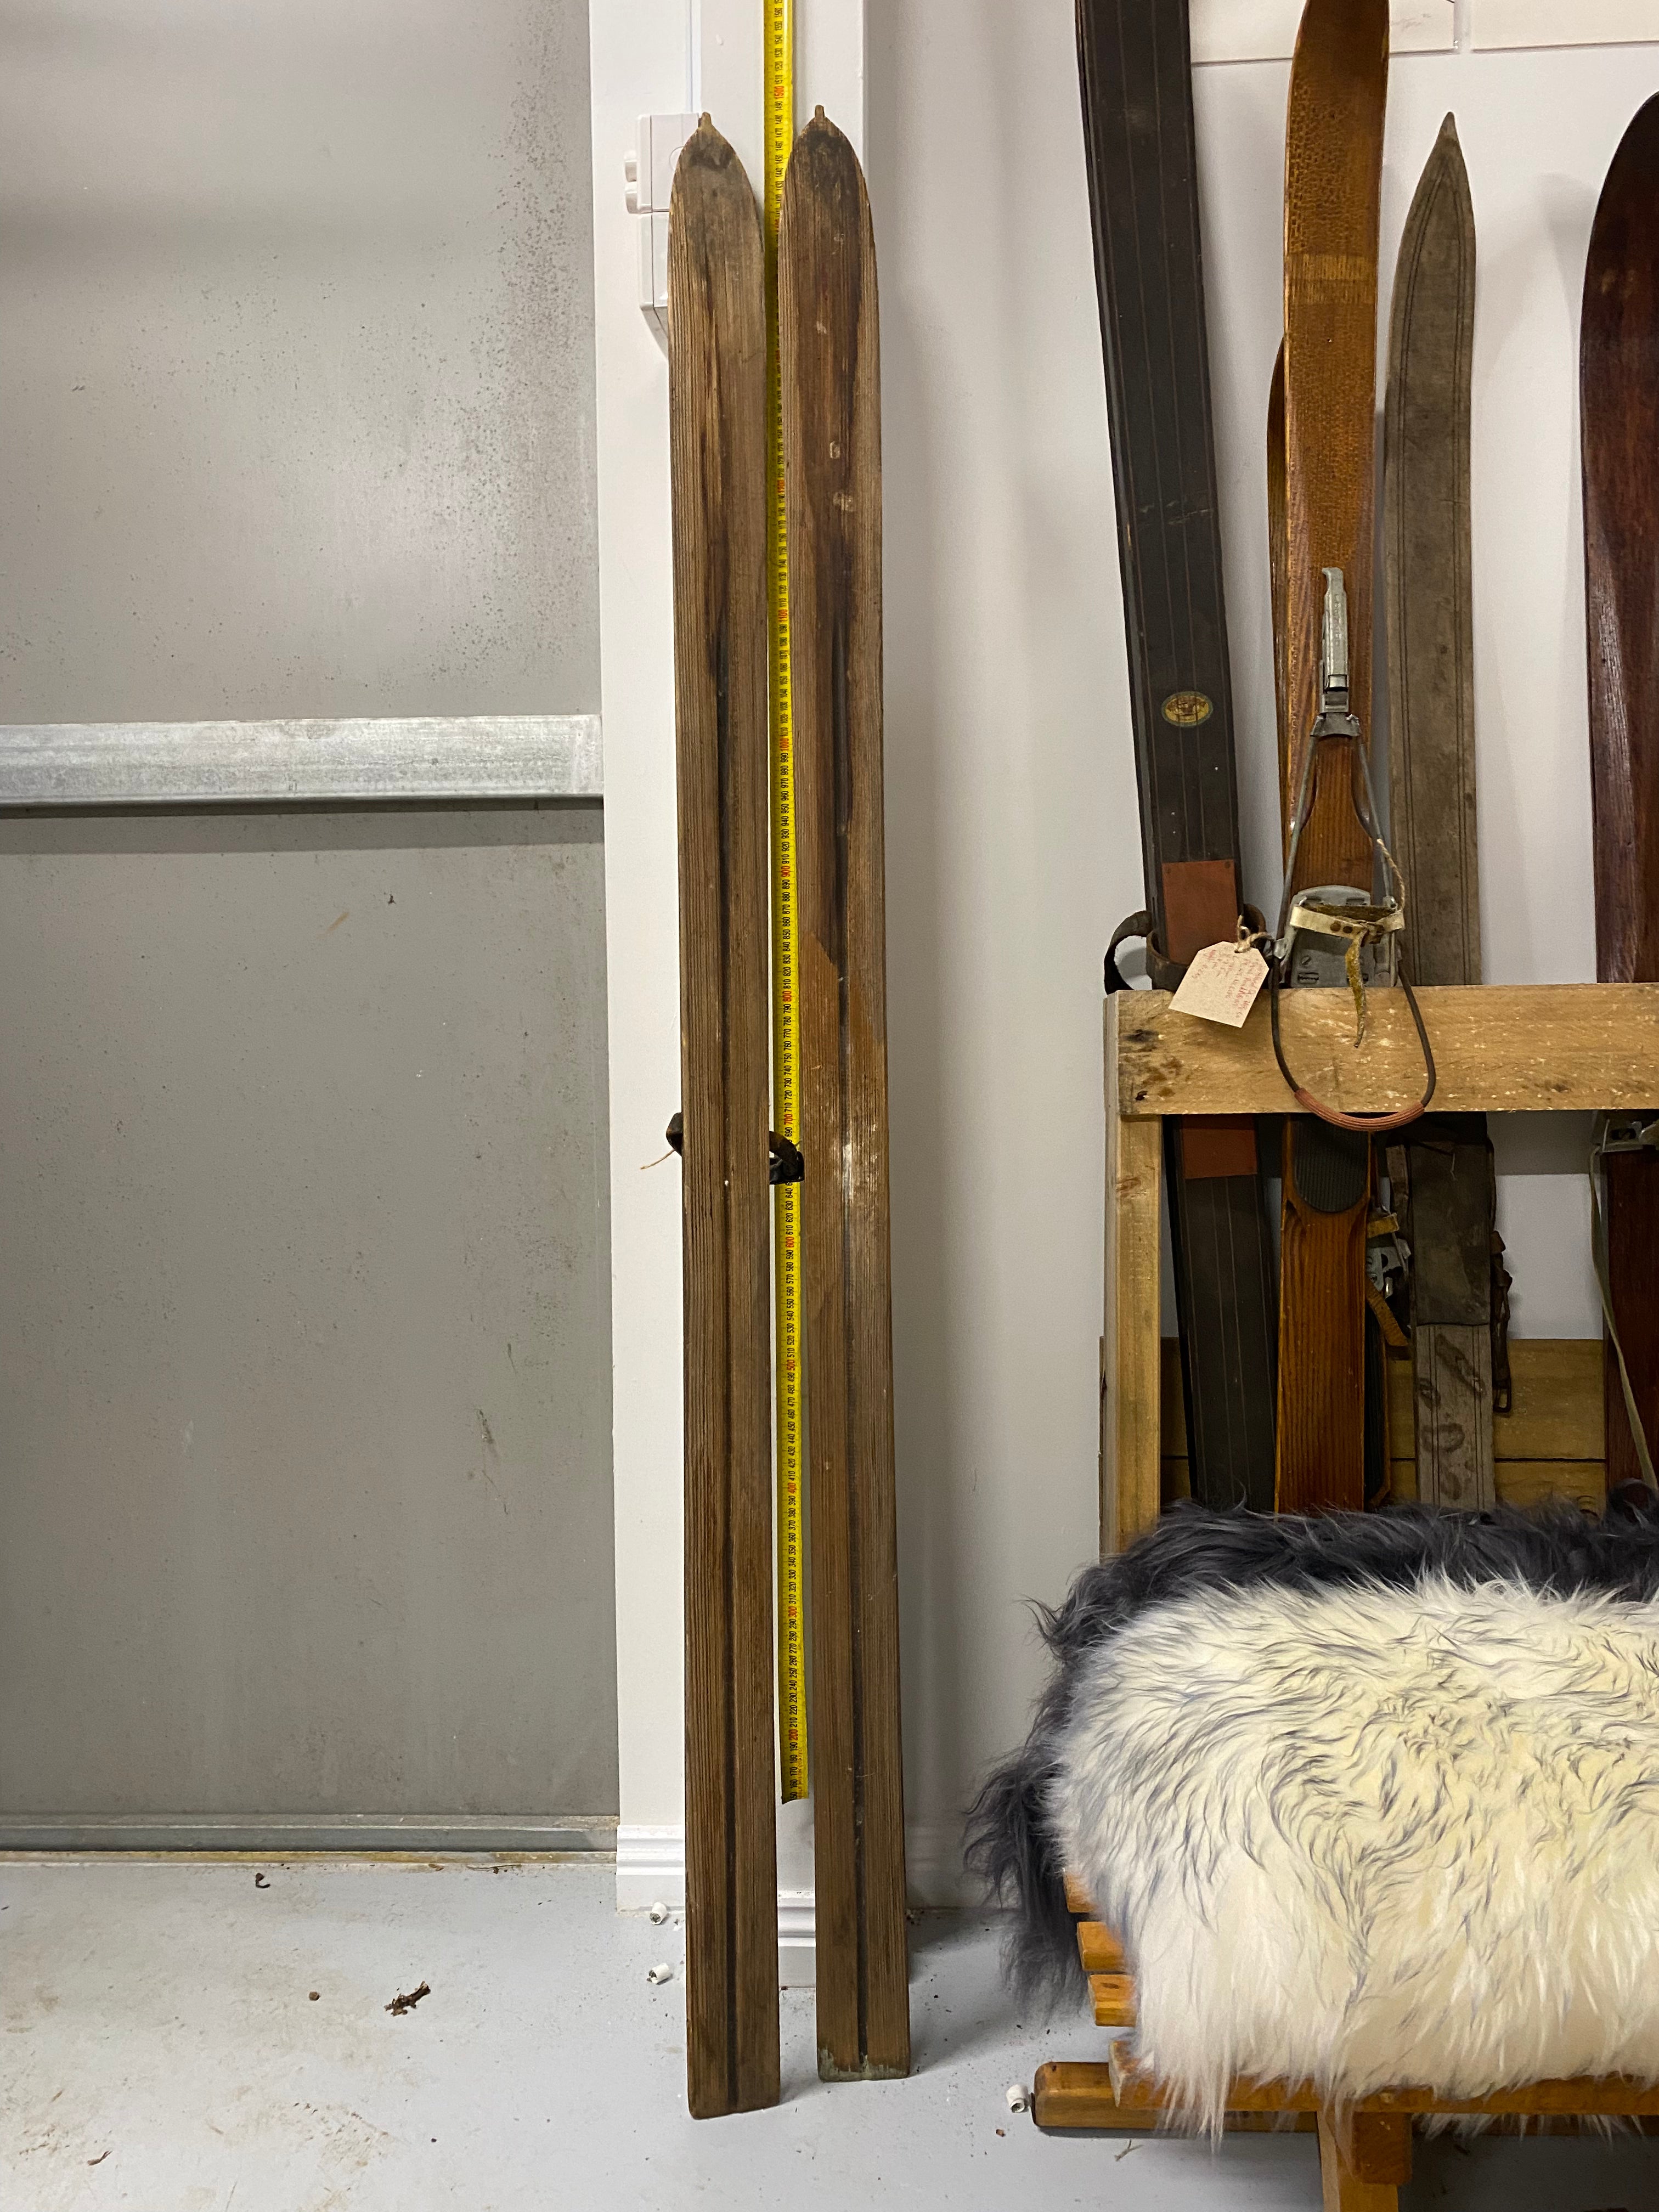 Full Height bases view: Montgomery Ward vintage wooden skis. Leaning against white painted wall with yellow measuring tape. Stacked to the right hand side are more wooden skis